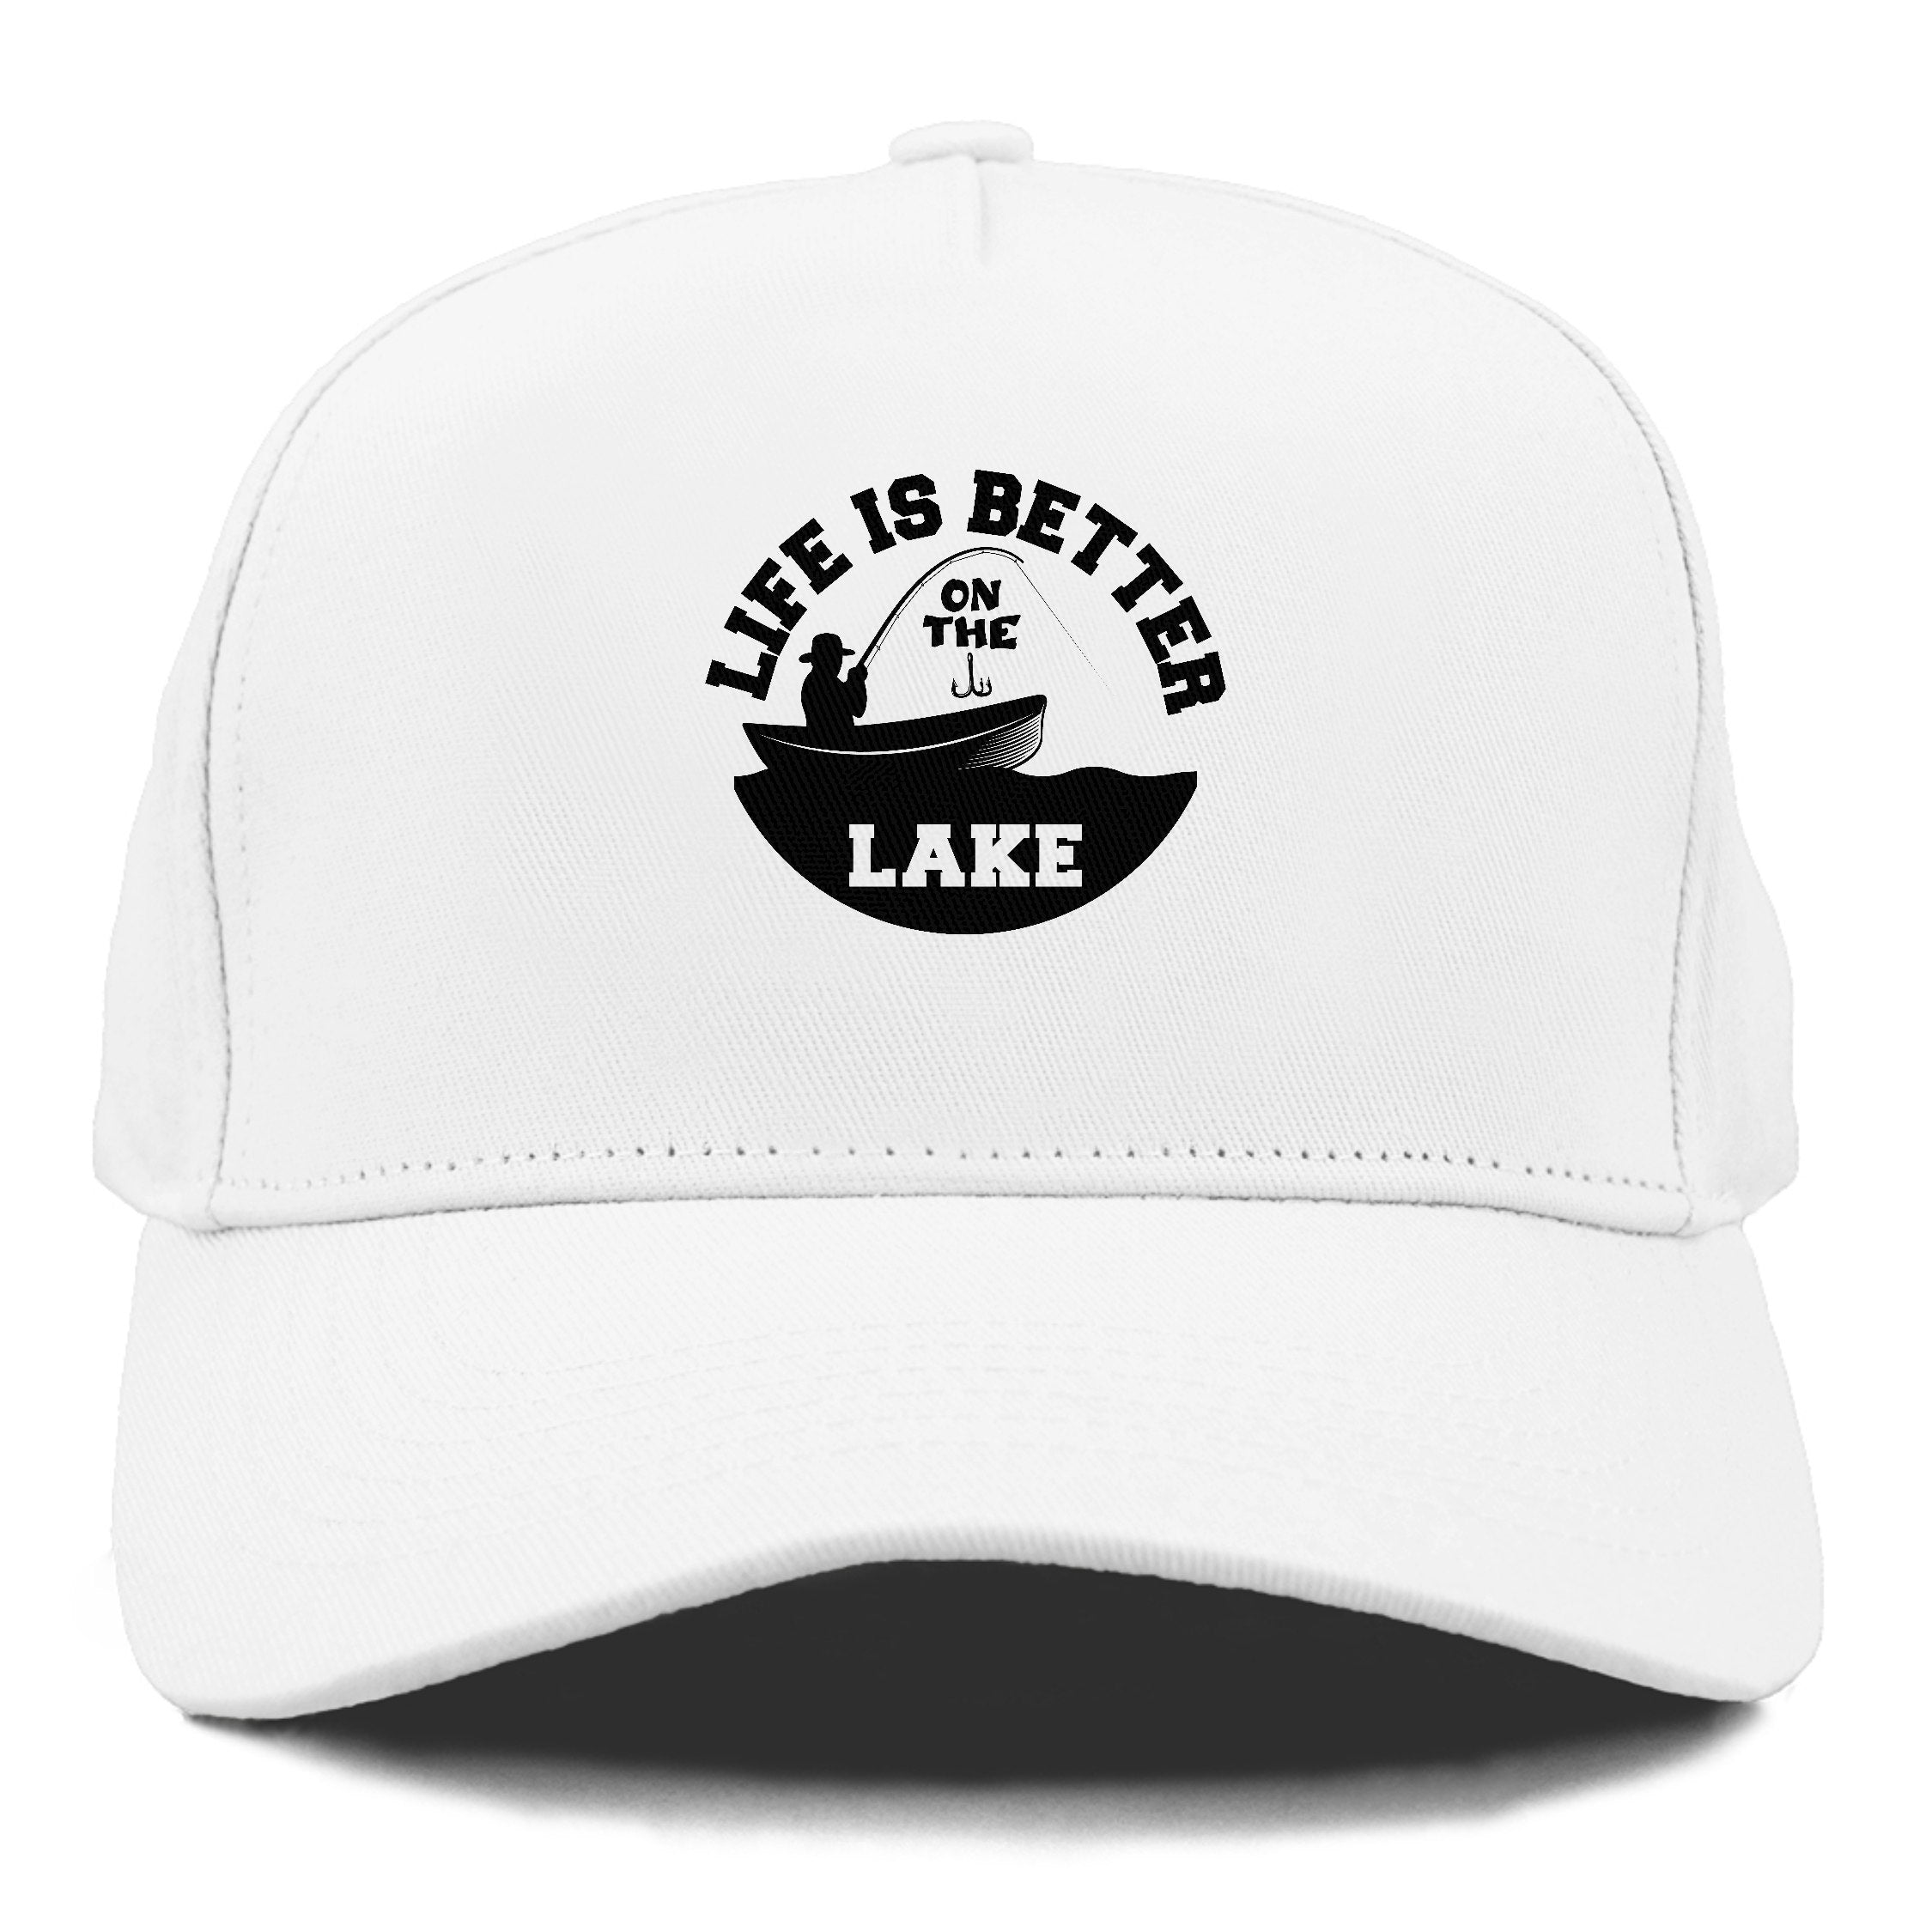 Life Is Better at the Lake. Lake Mode. Lake Life Best Life. Lake Camp Life  Gifts Cap for Sale by PaulLesser